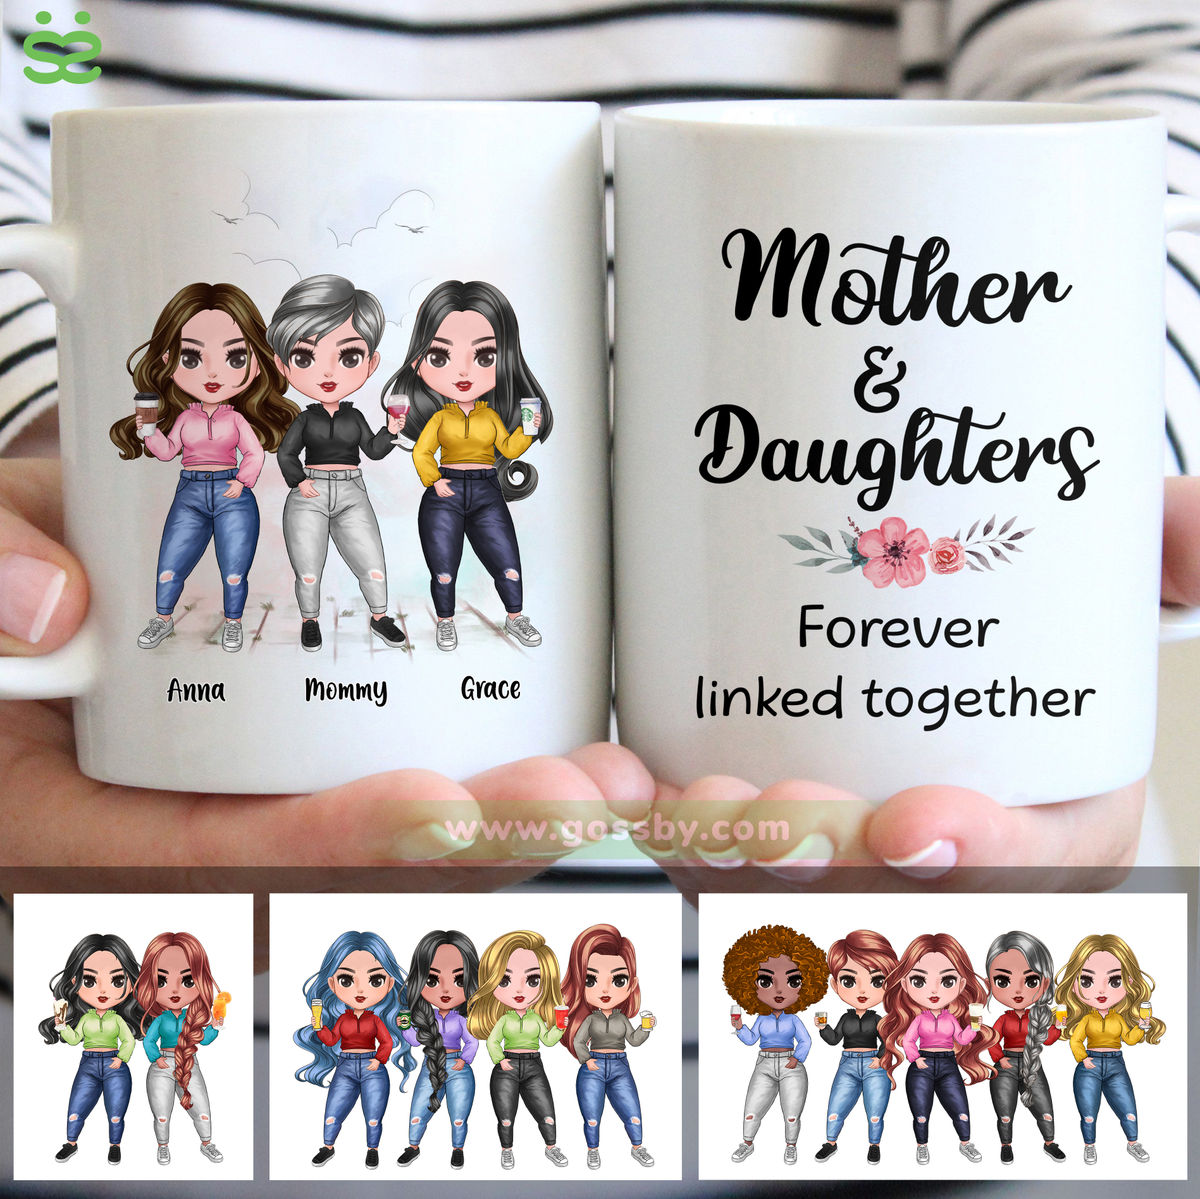 Personalized Mug - Mother And Daughters Forever Linked Together (6442)